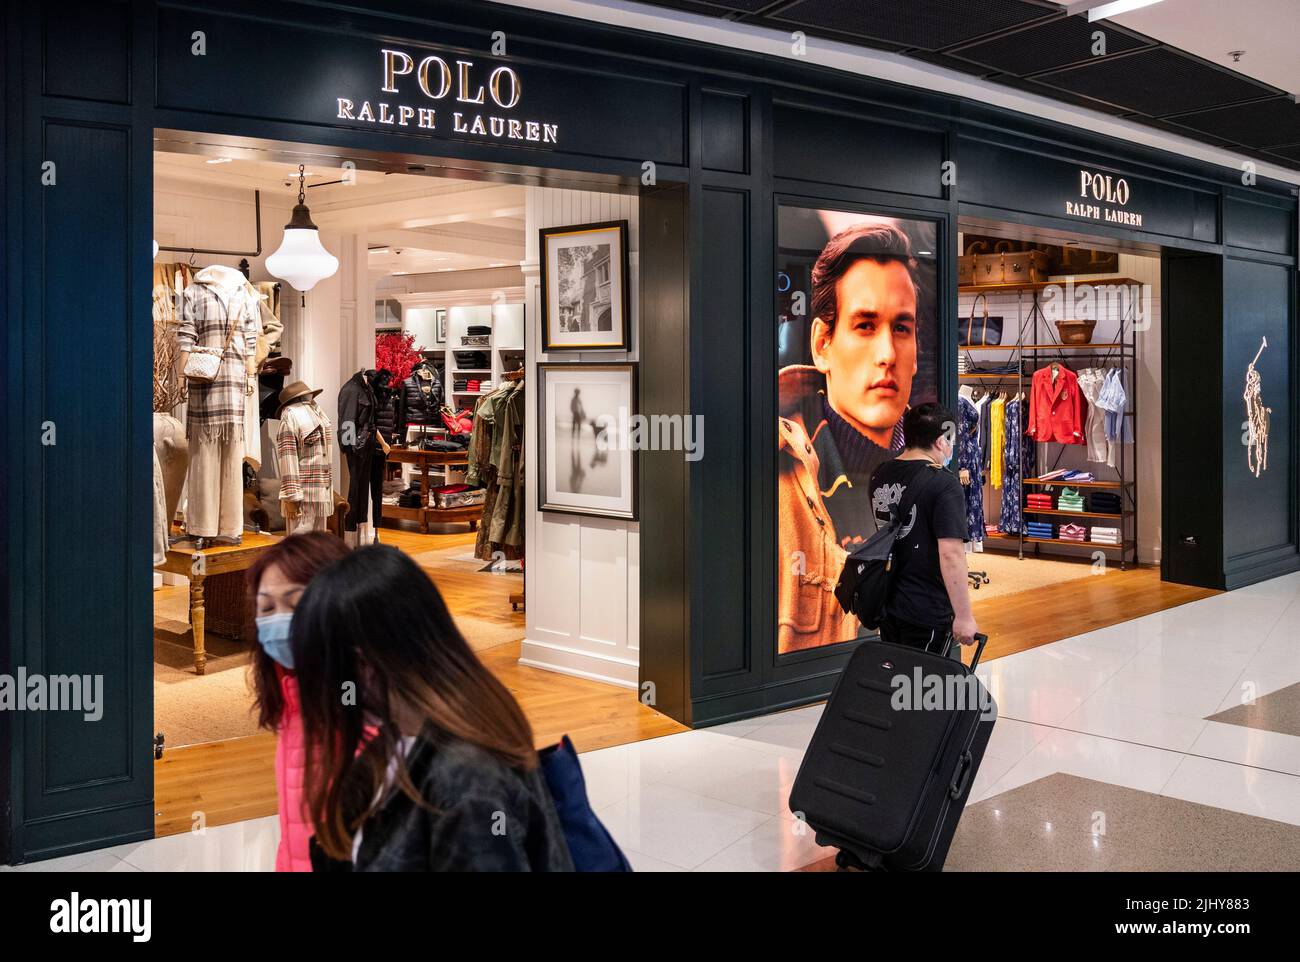 Polo ralph lauren sign hi-res stock photography and images - Alamy